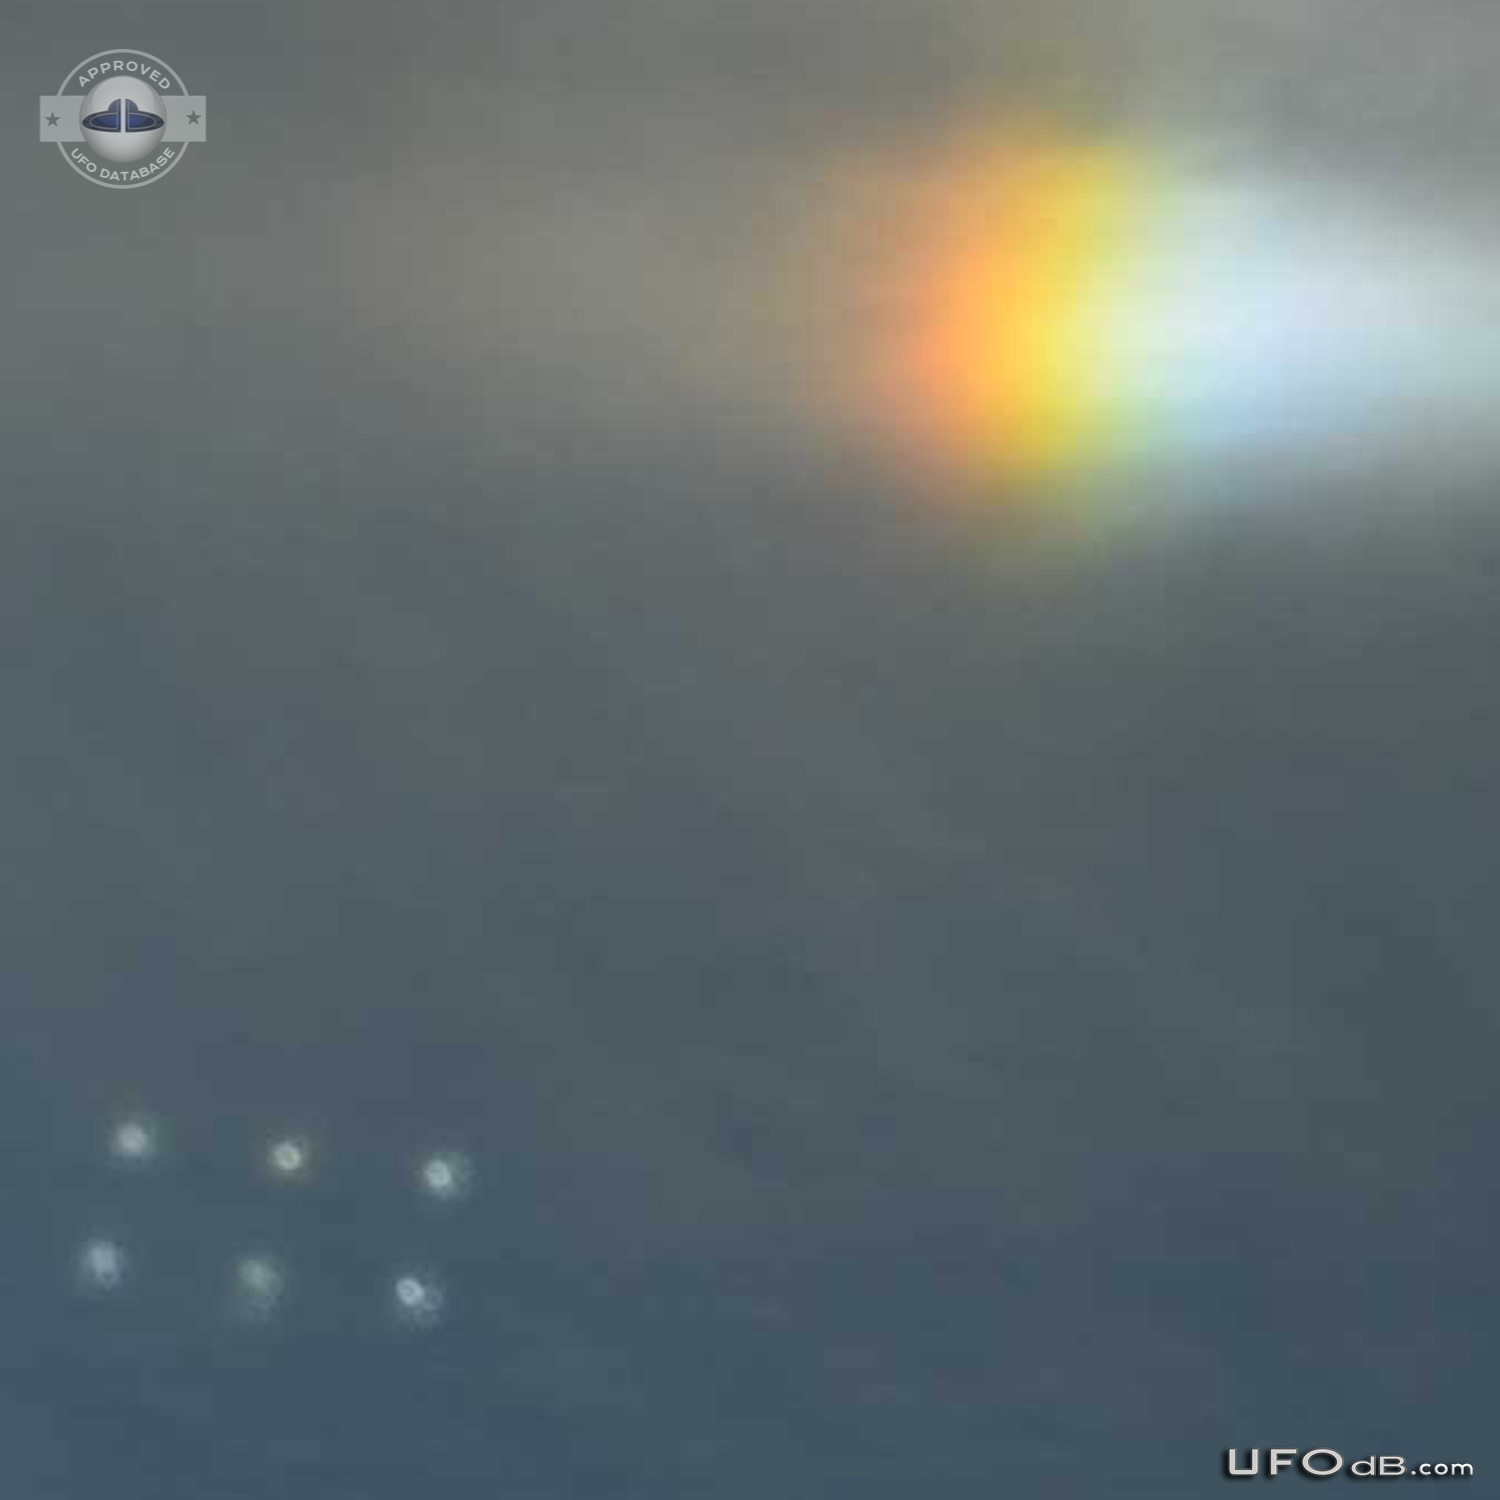 Pictures shot from bus reveals six ufos in a rectangle formation UFO Picture #383-5